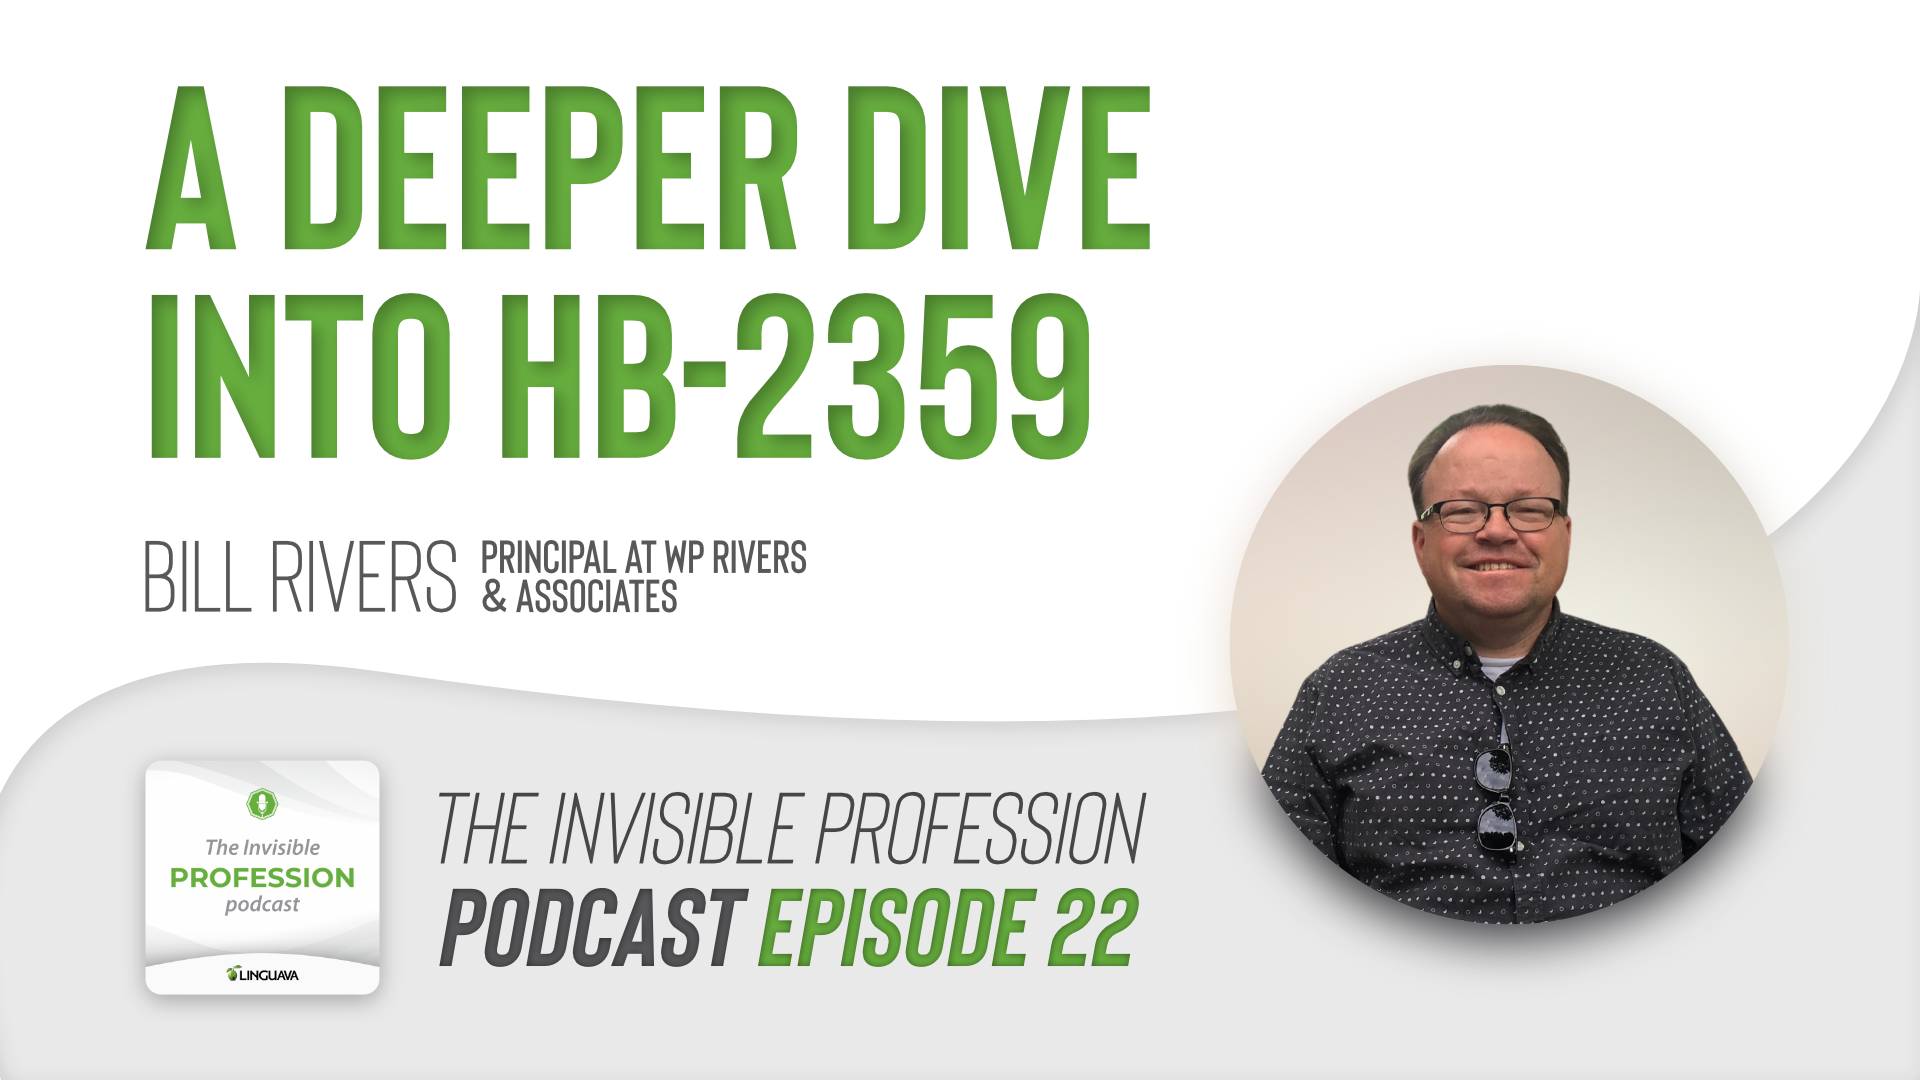 text for podcast with a deeper dive into HB 2359 with bill rivers